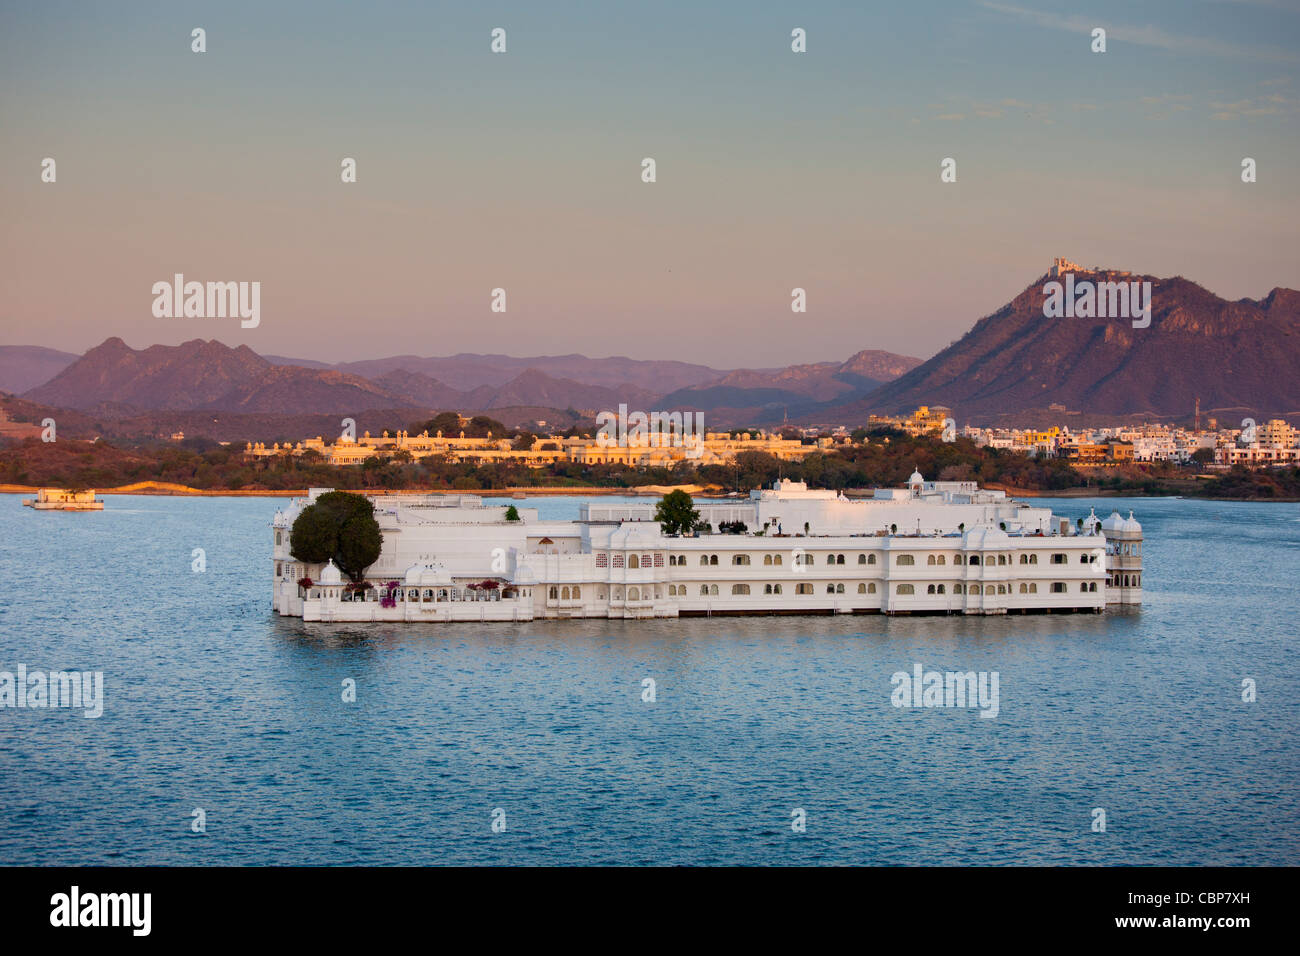 The Lake Palace Hotel, Jag Niwas, on island site on Lake Pichola in first light of early morning, Udaipur, Rajasthan, India Stock Photo